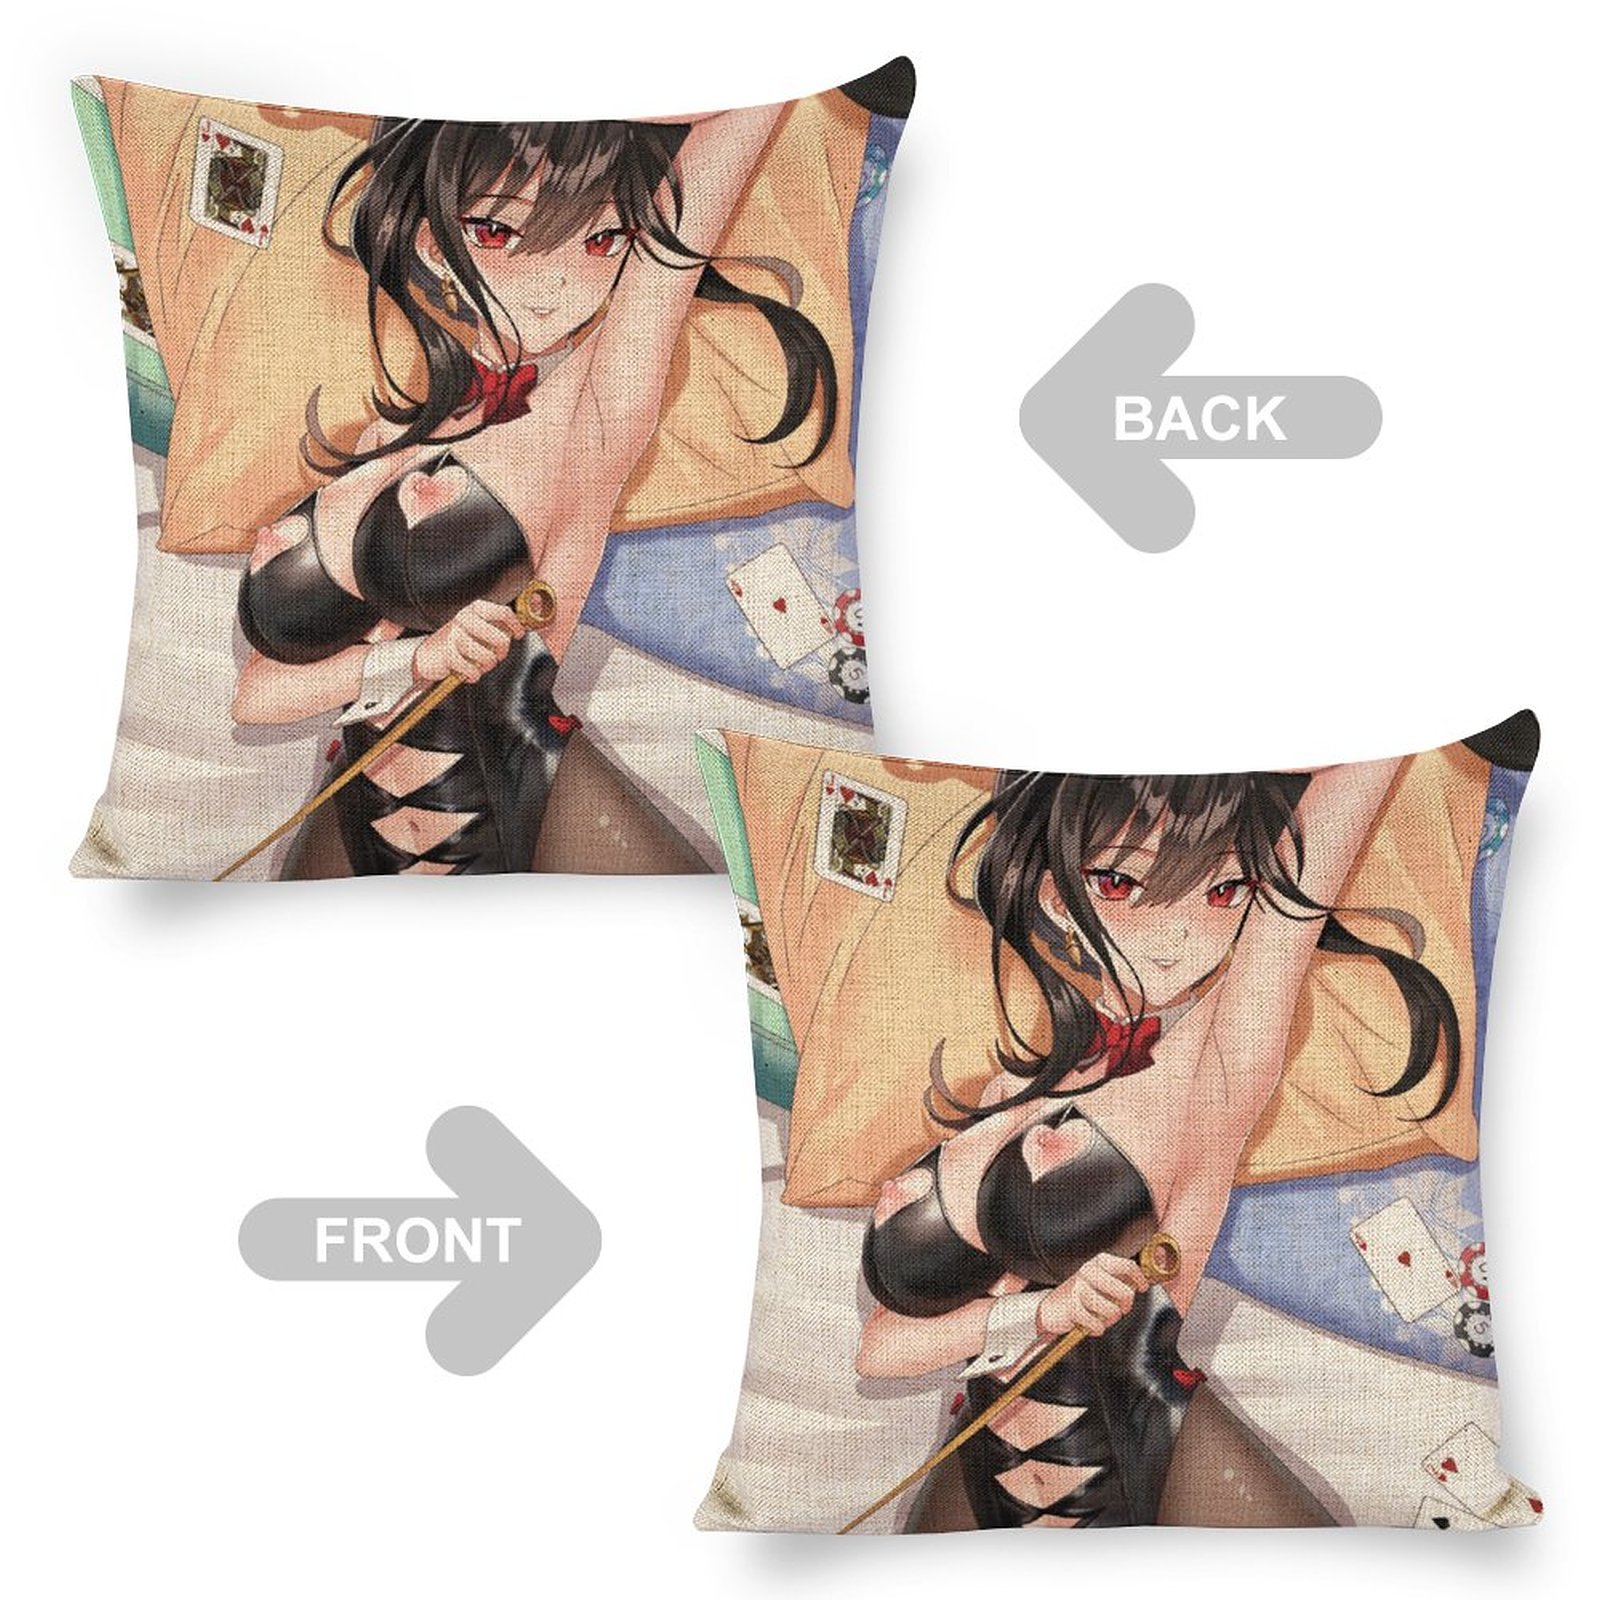 Spy x Family Thorn Princess Yor Forger Breathable Linen Square Throw Cushion Cover 18x18in(45x45cm)